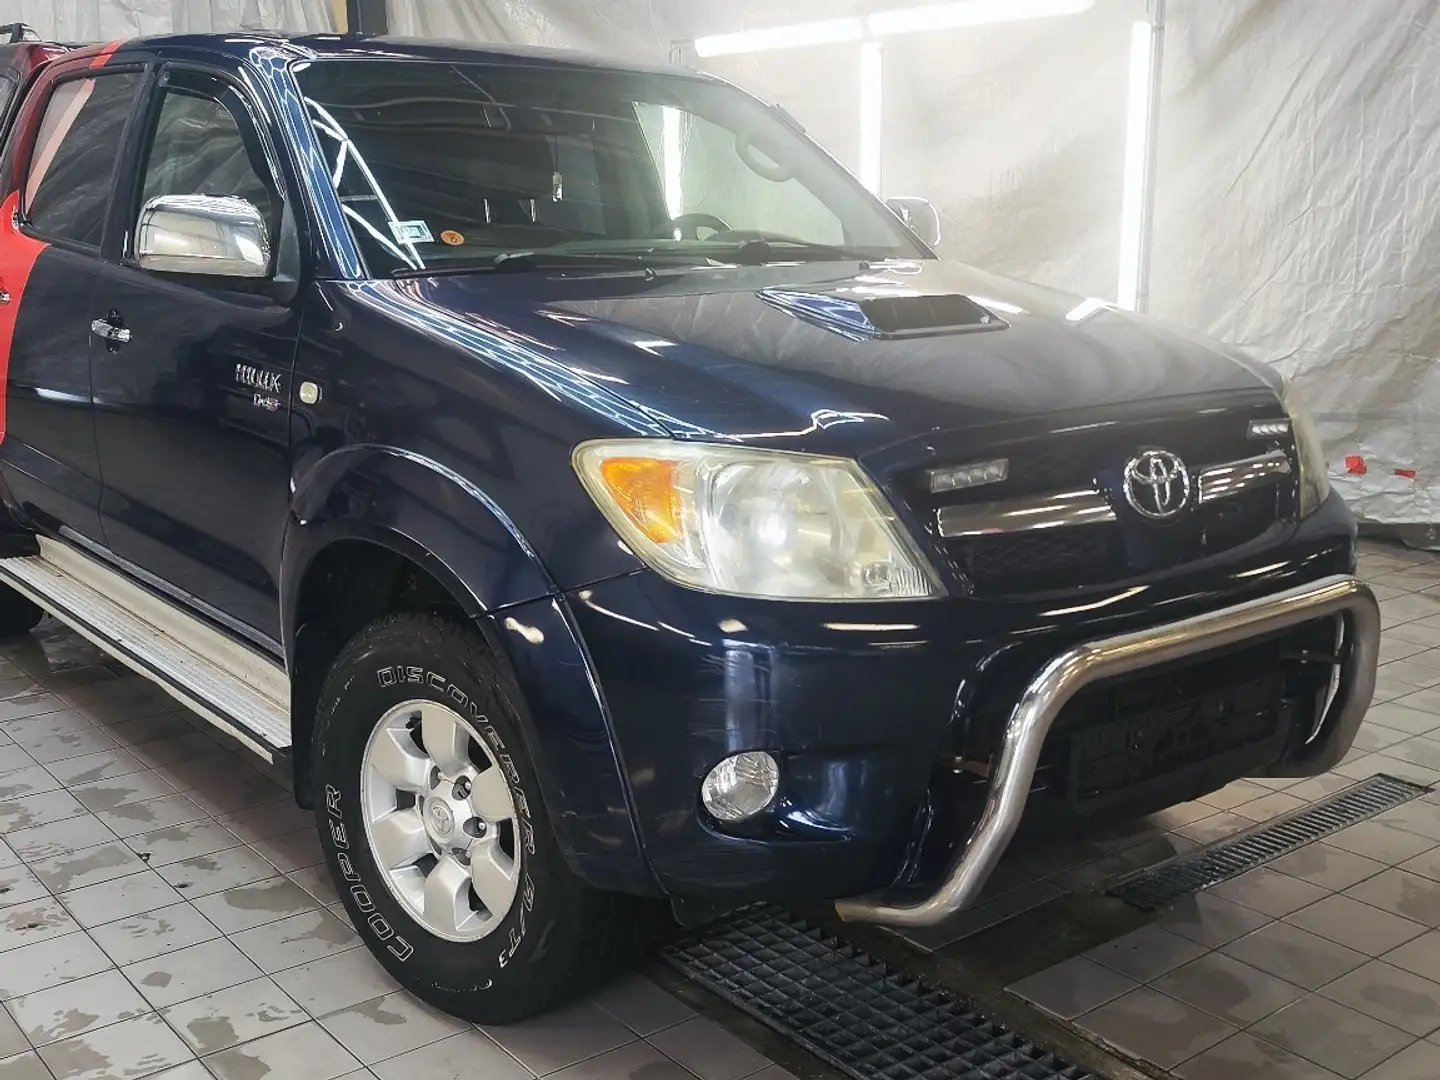 Toyota Hilux 4x4 Double Cab.to sell only Africa Noir - 1